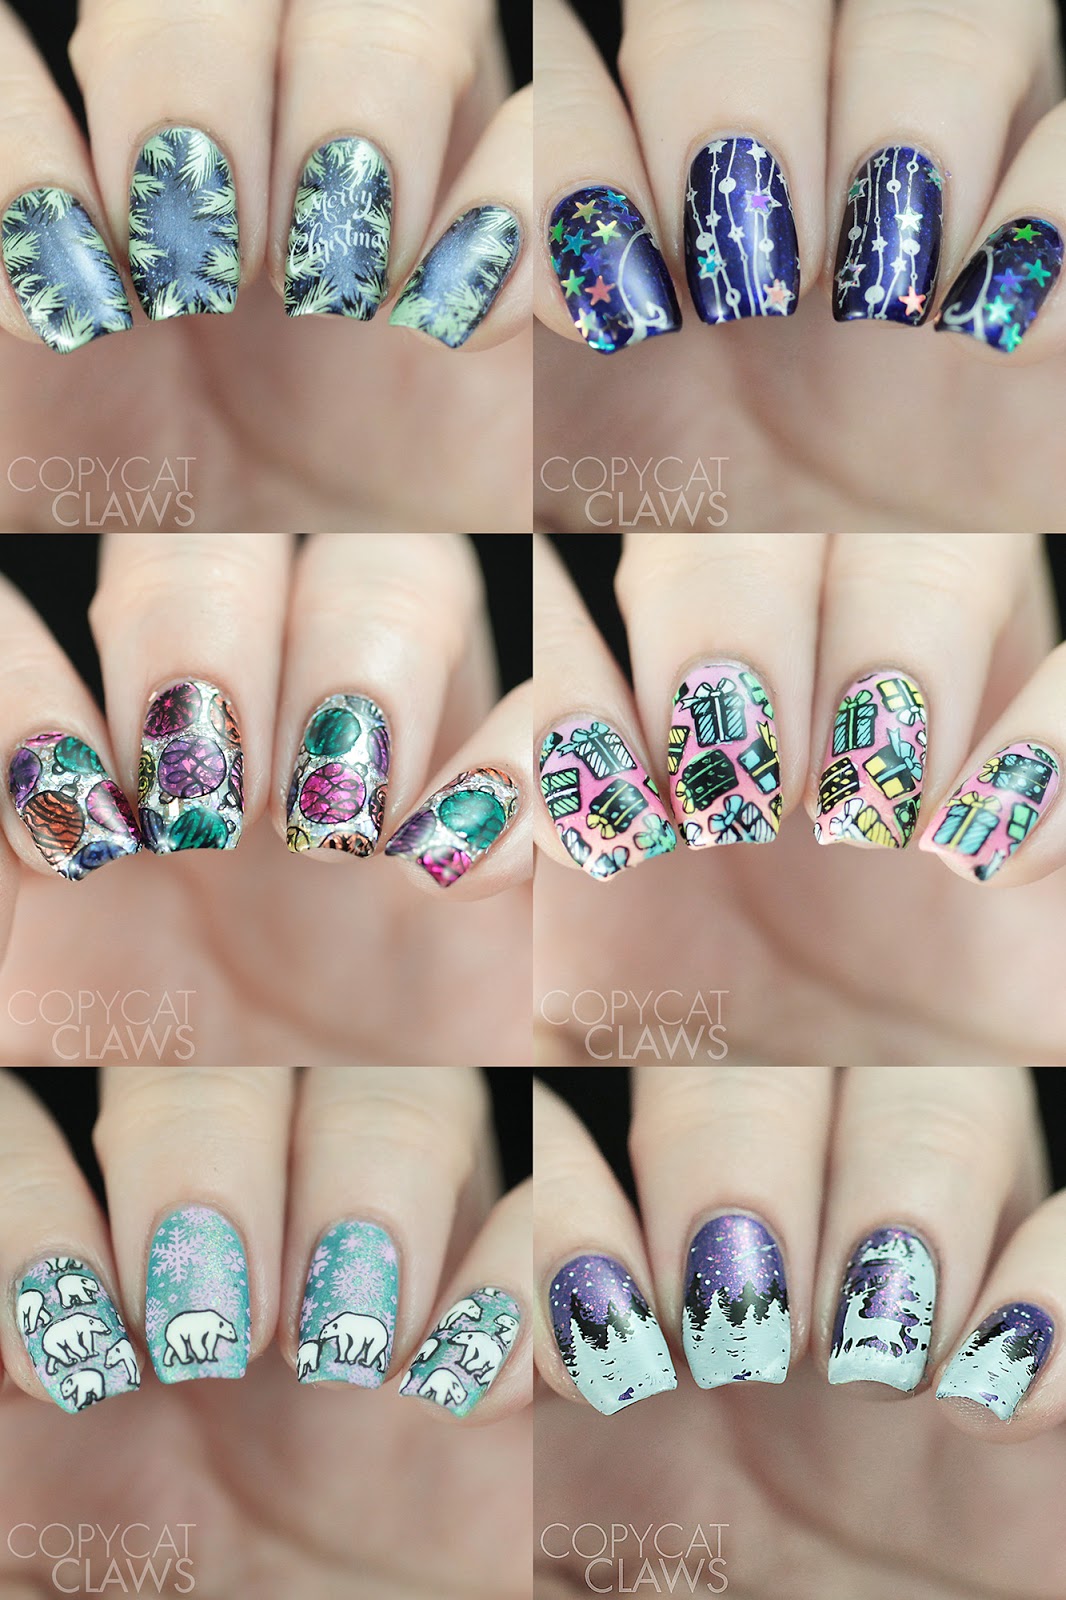 Copycat Claws: Whats Up Nails Holiday/Winter Stamping Plates